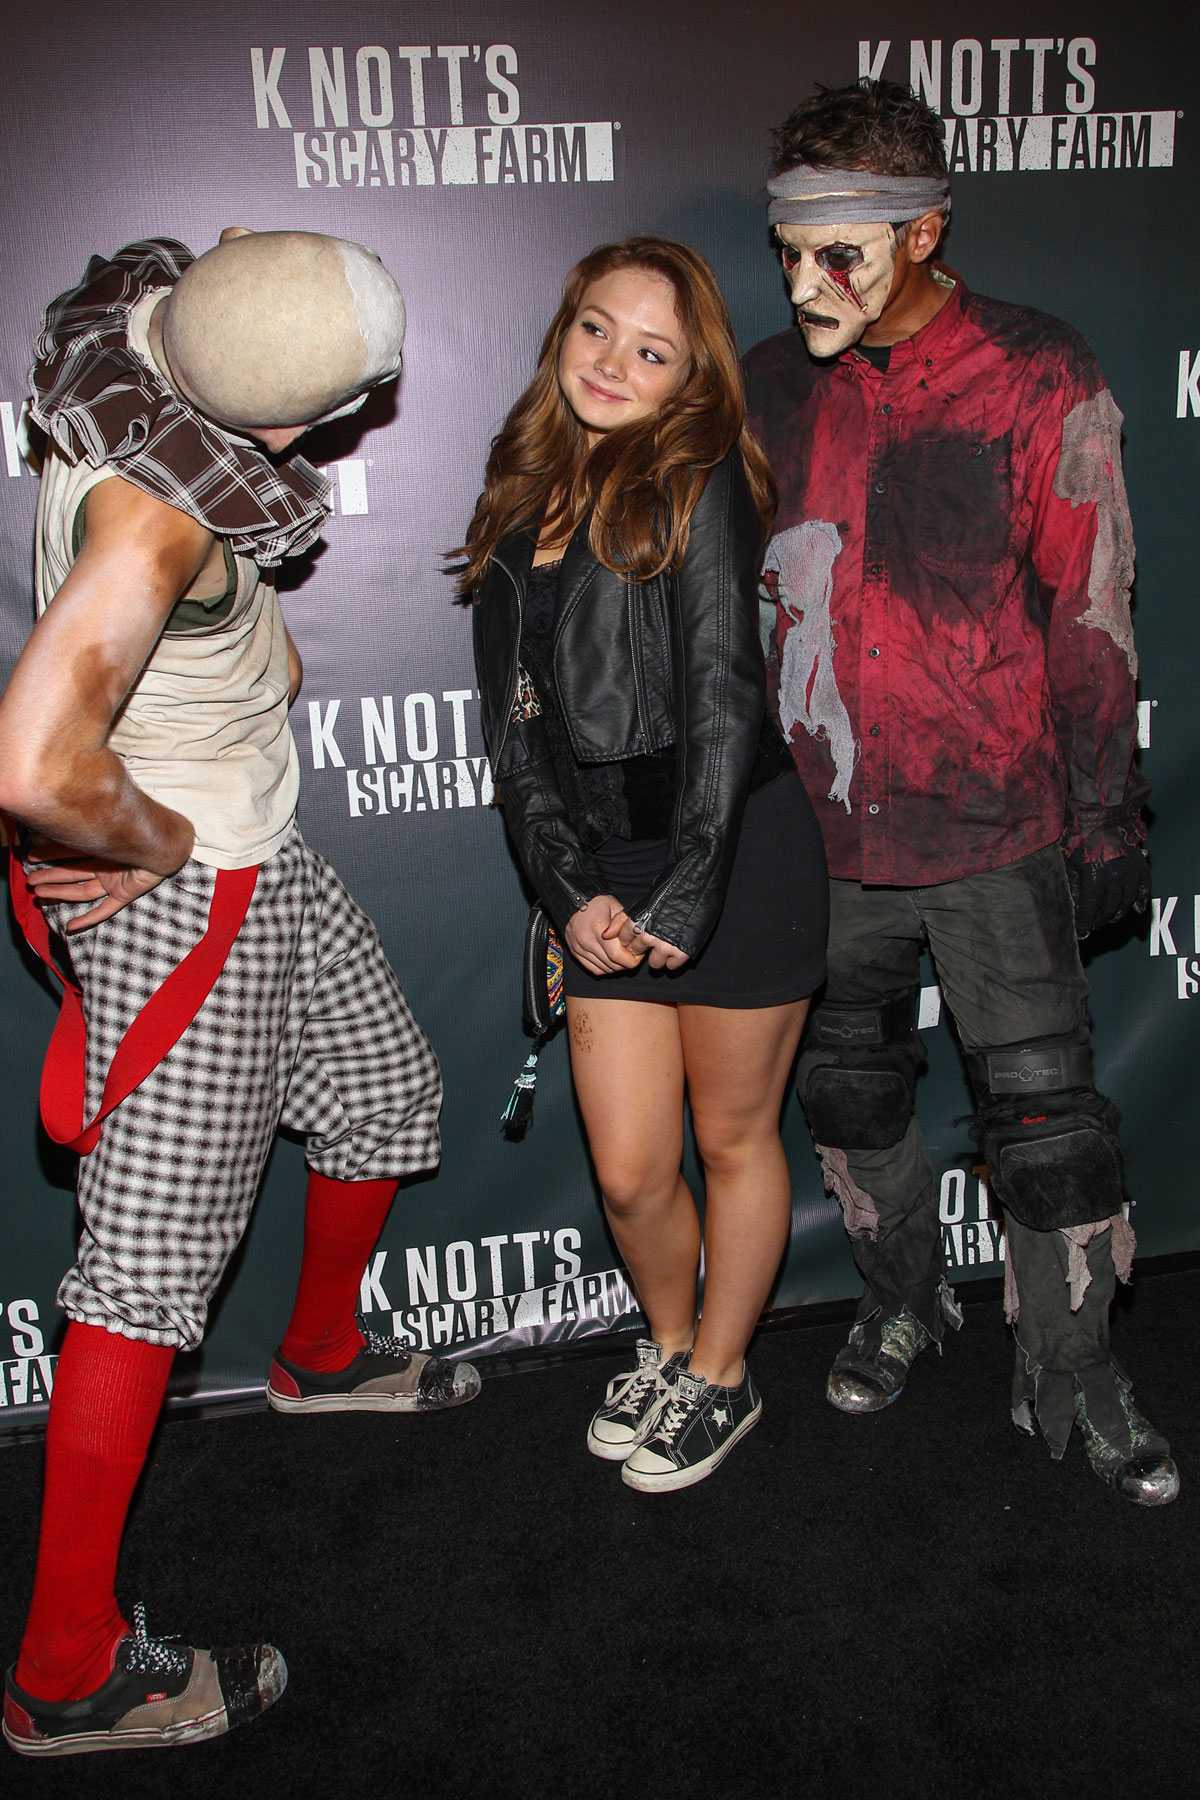 Natalie Alyn attends Lind Knotts Scary Farm Opening